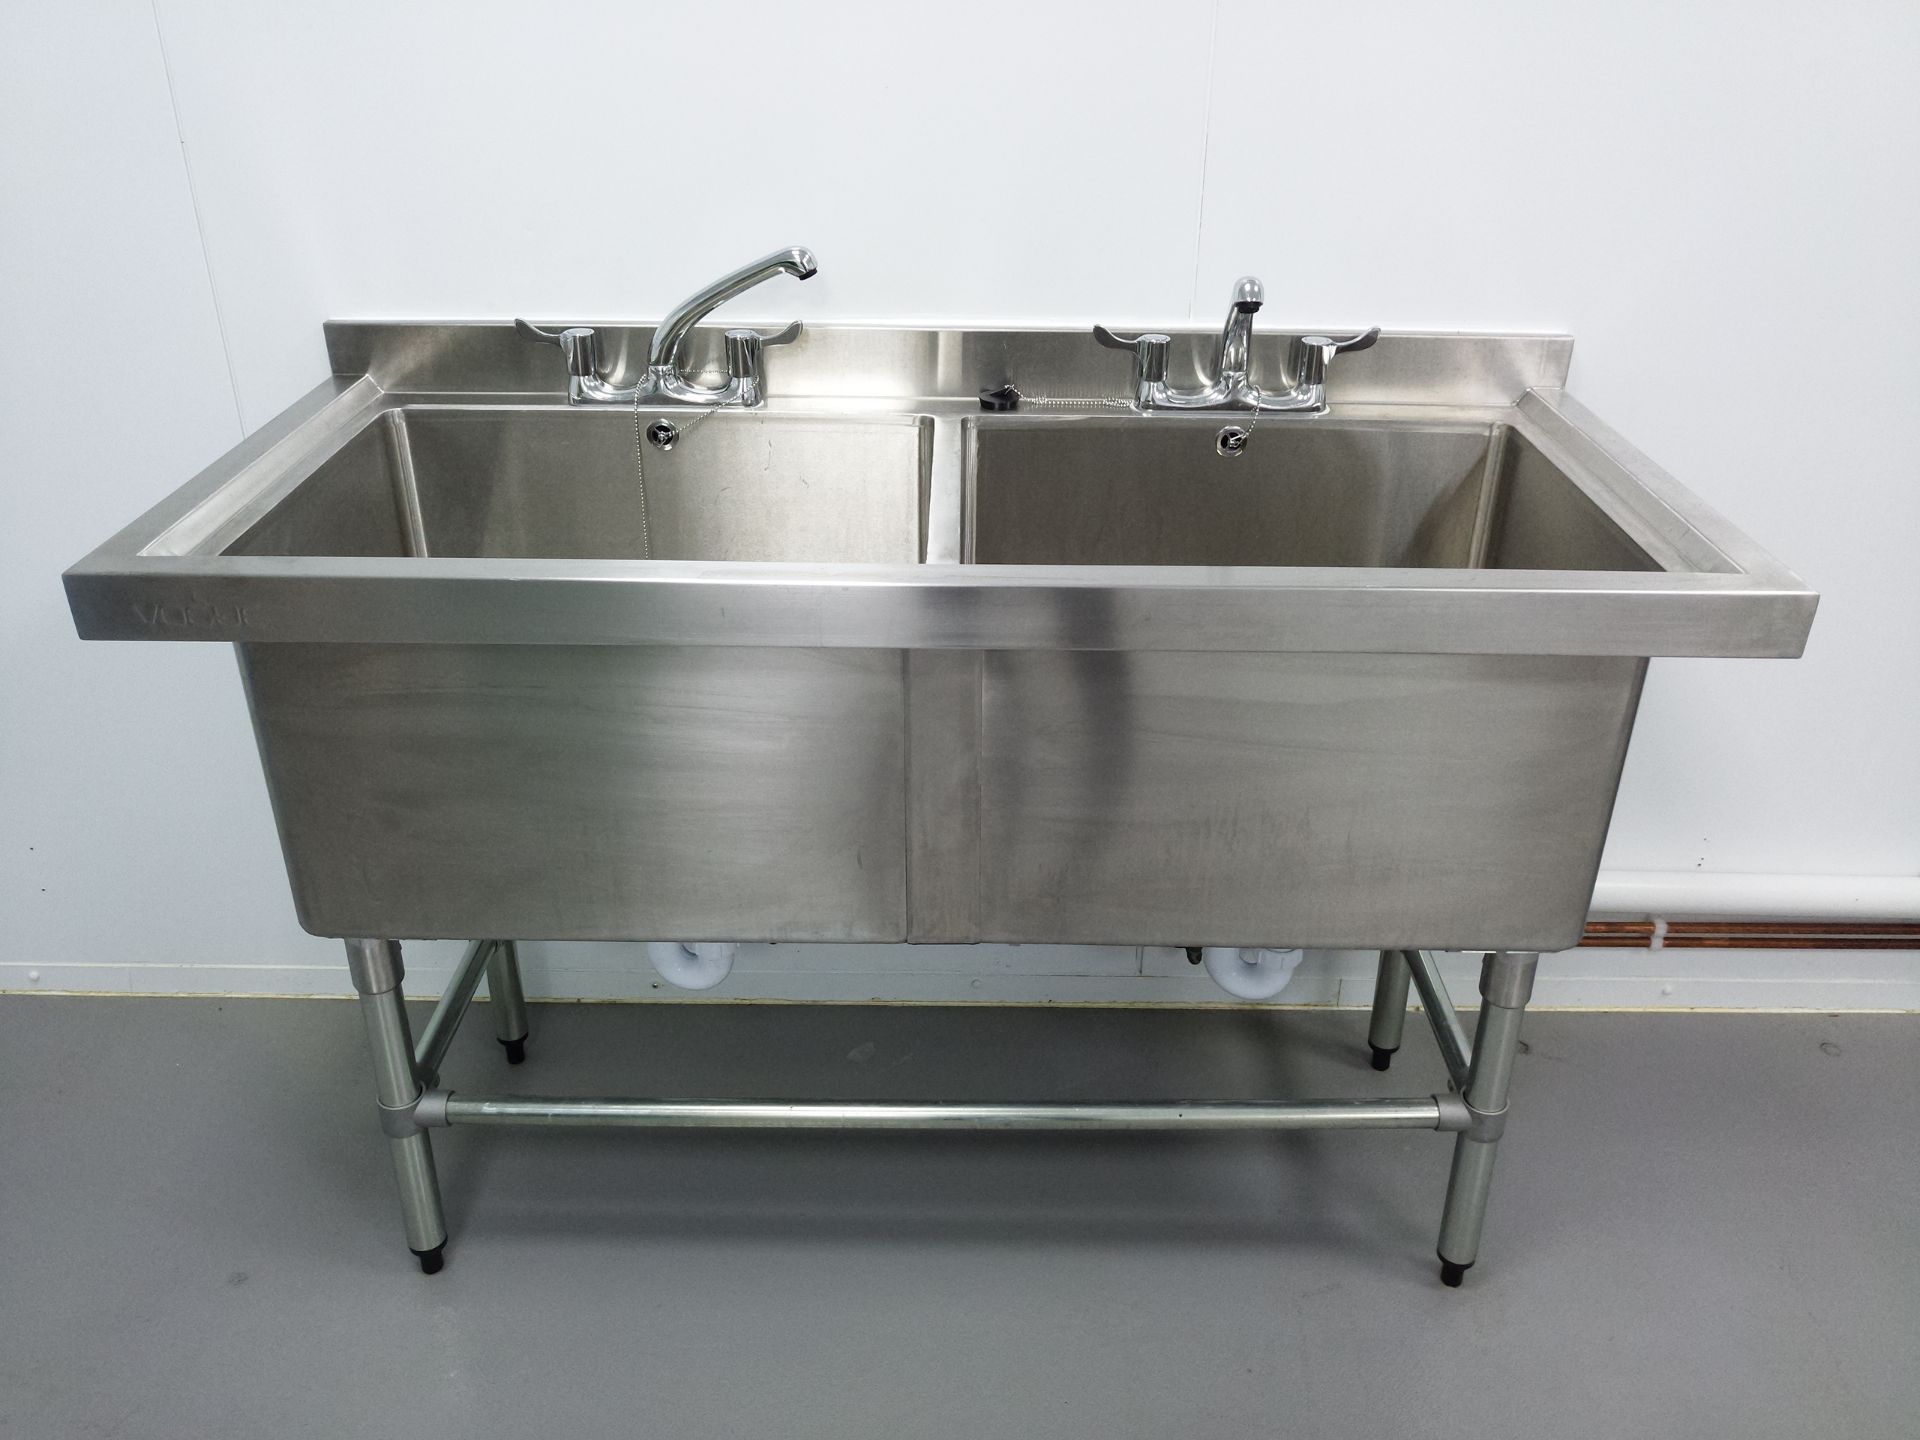 Vogue Stainless Steel Double Deep Pot Sink with Taps